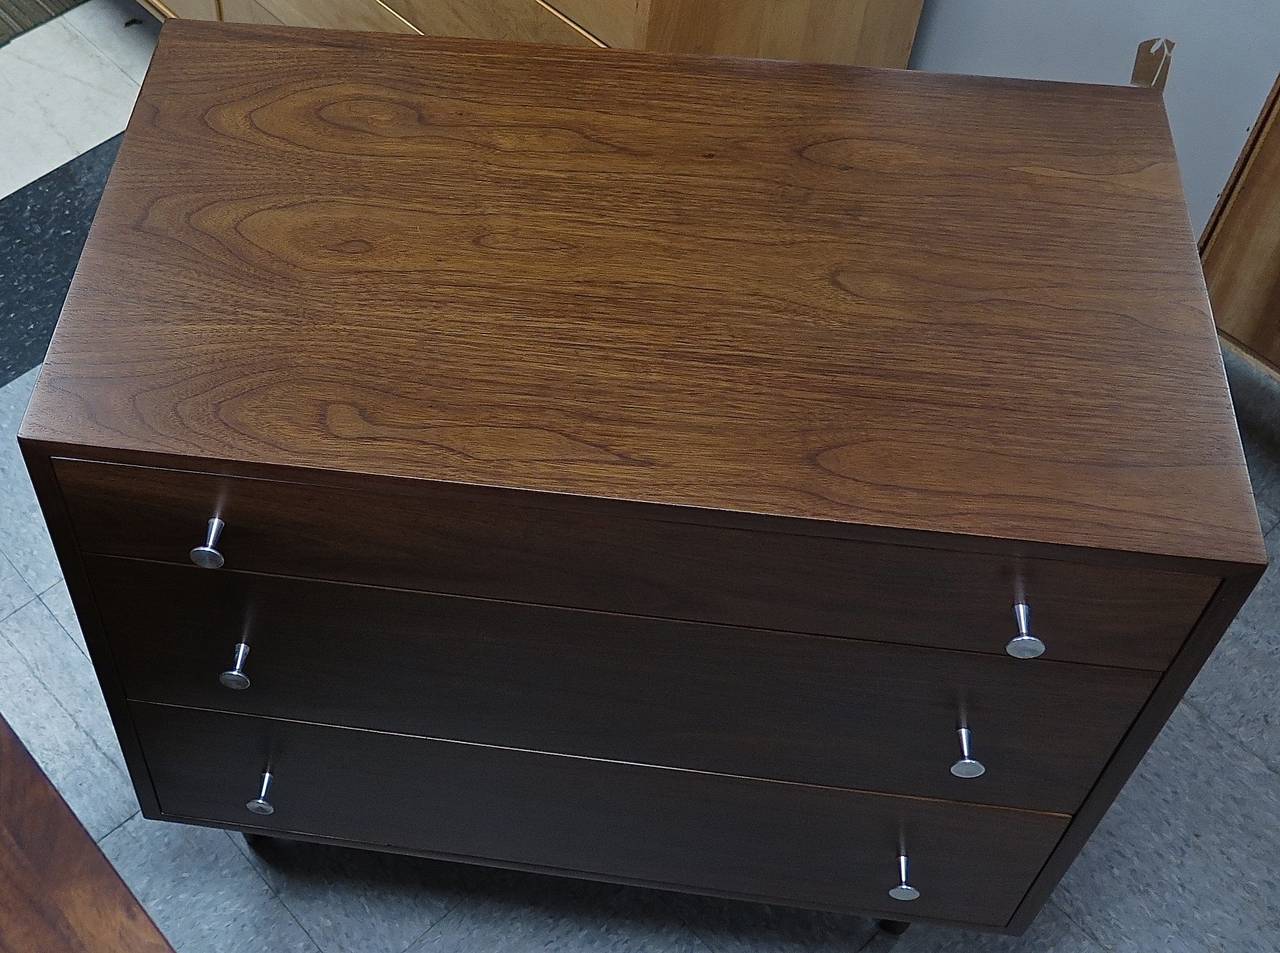 Labeled. Perfectly proportioned smaller sized dresser. Nice warm brown toned walnut. Aluminum pulls. Some dark spots under the new finish on top. Great piece!